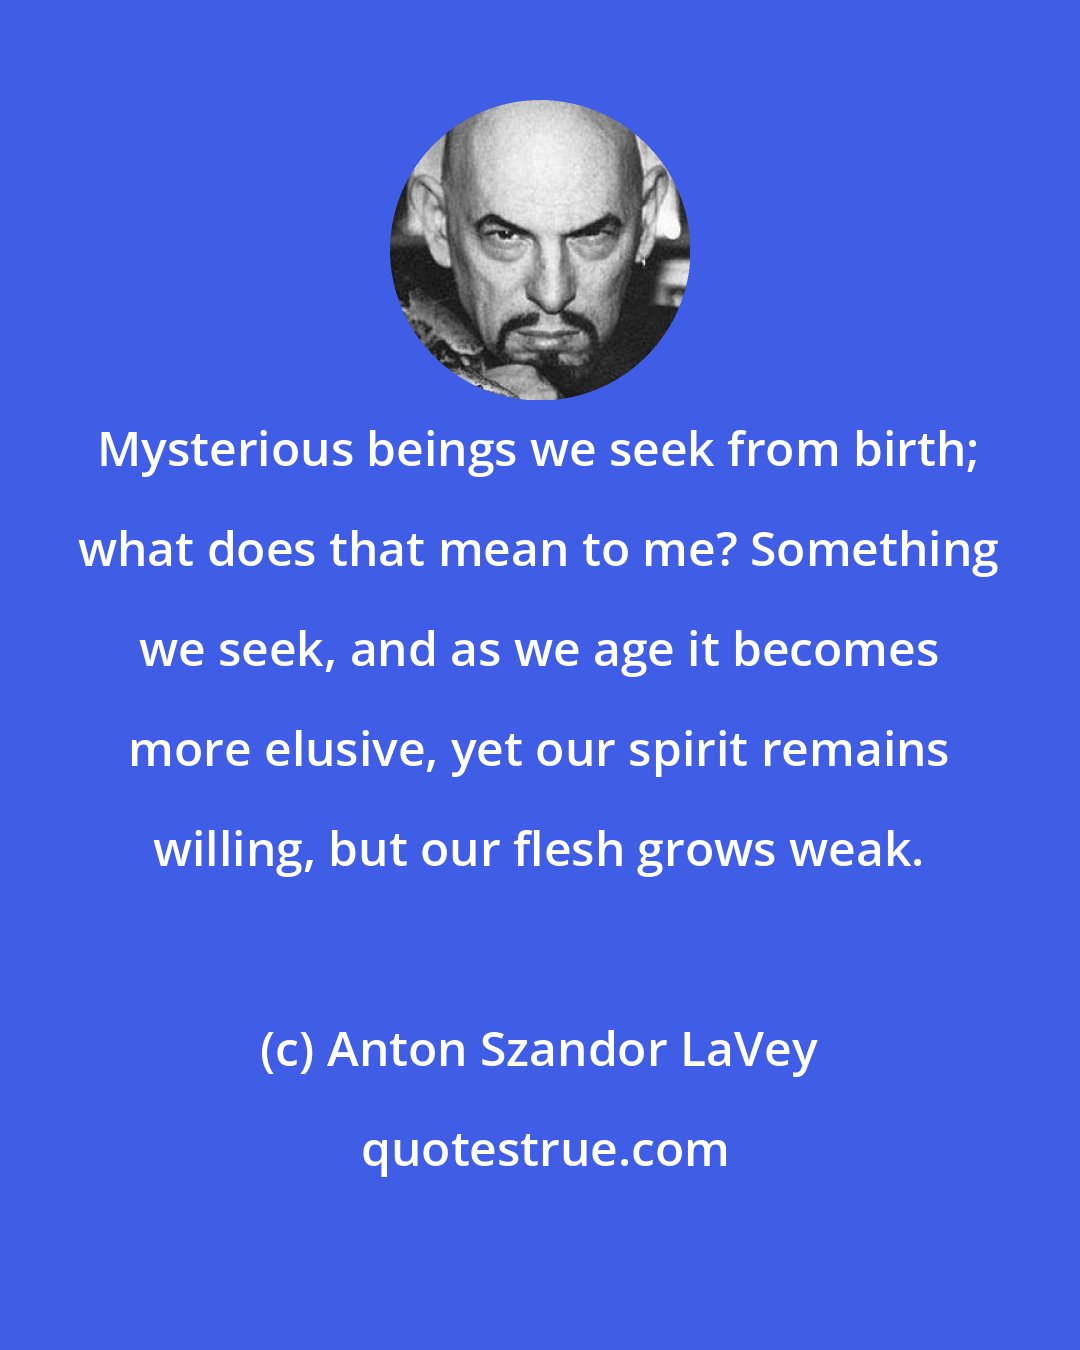 Anton Szandor LaVey: Mysterious beings we seek from birth; what does that mean to me? Something we seek, and as we age it becomes more elusive, yet our spirit remains willing, but our flesh grows weak.